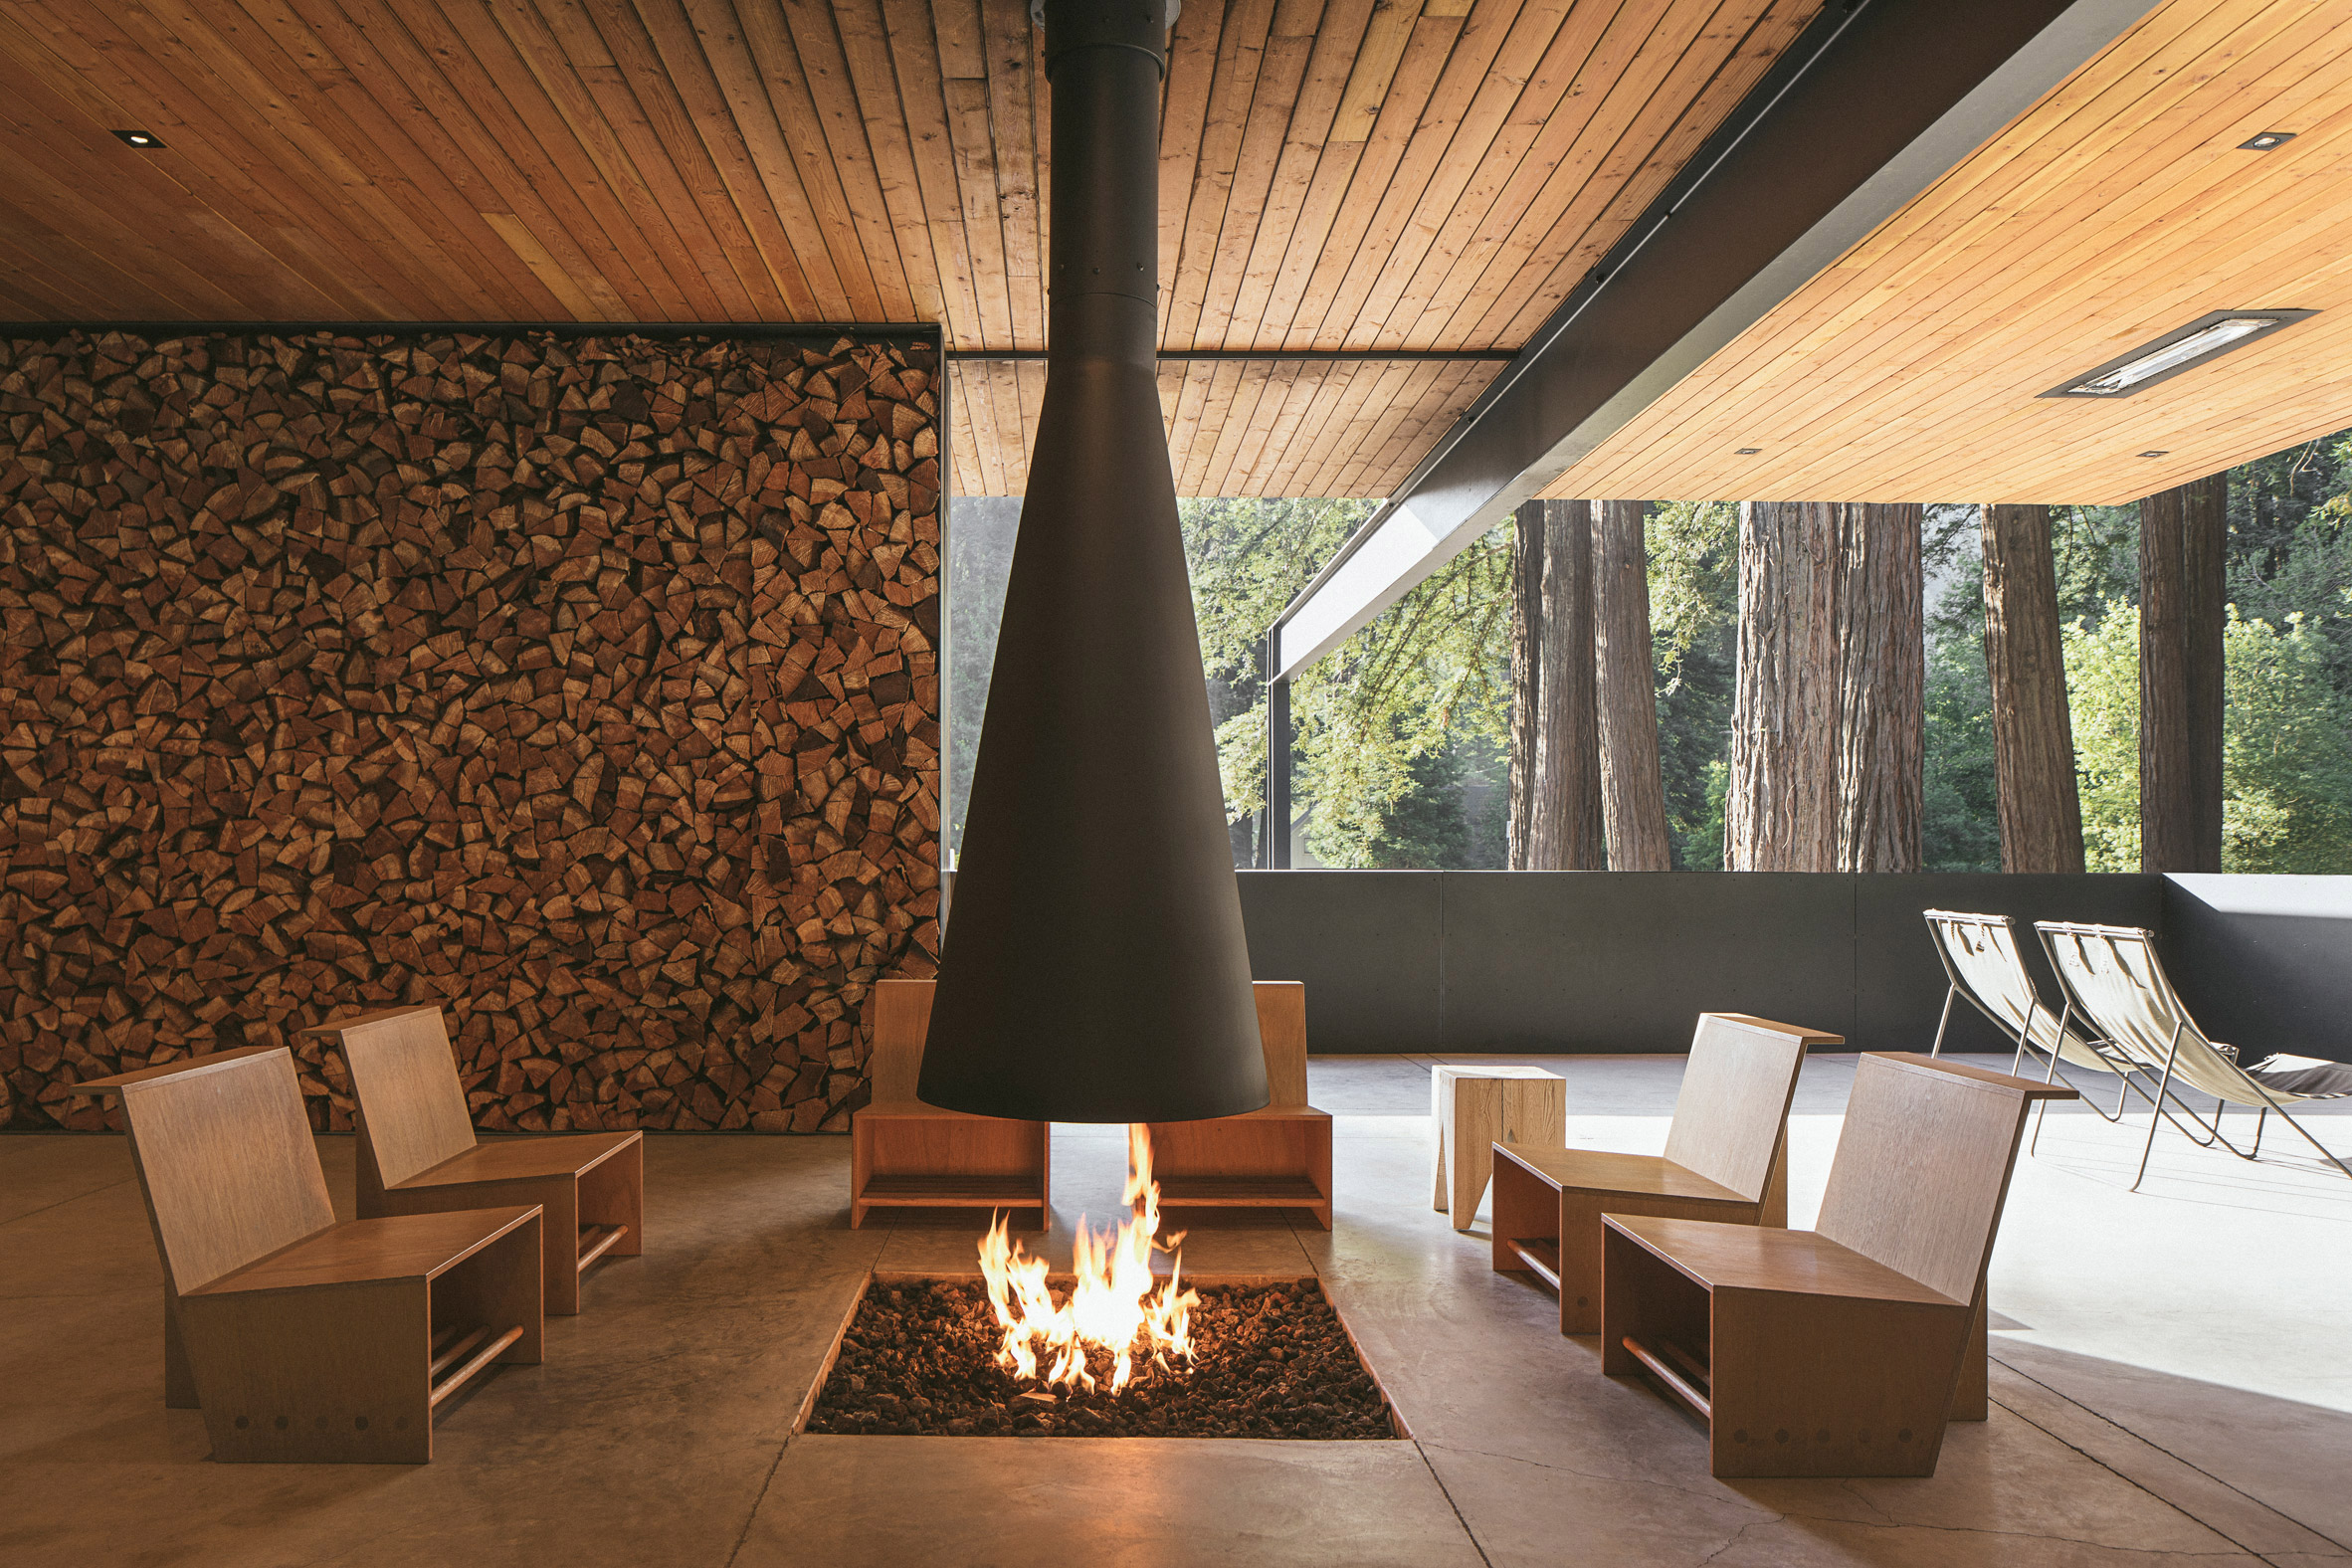 Covered fire place at glamping site in USA